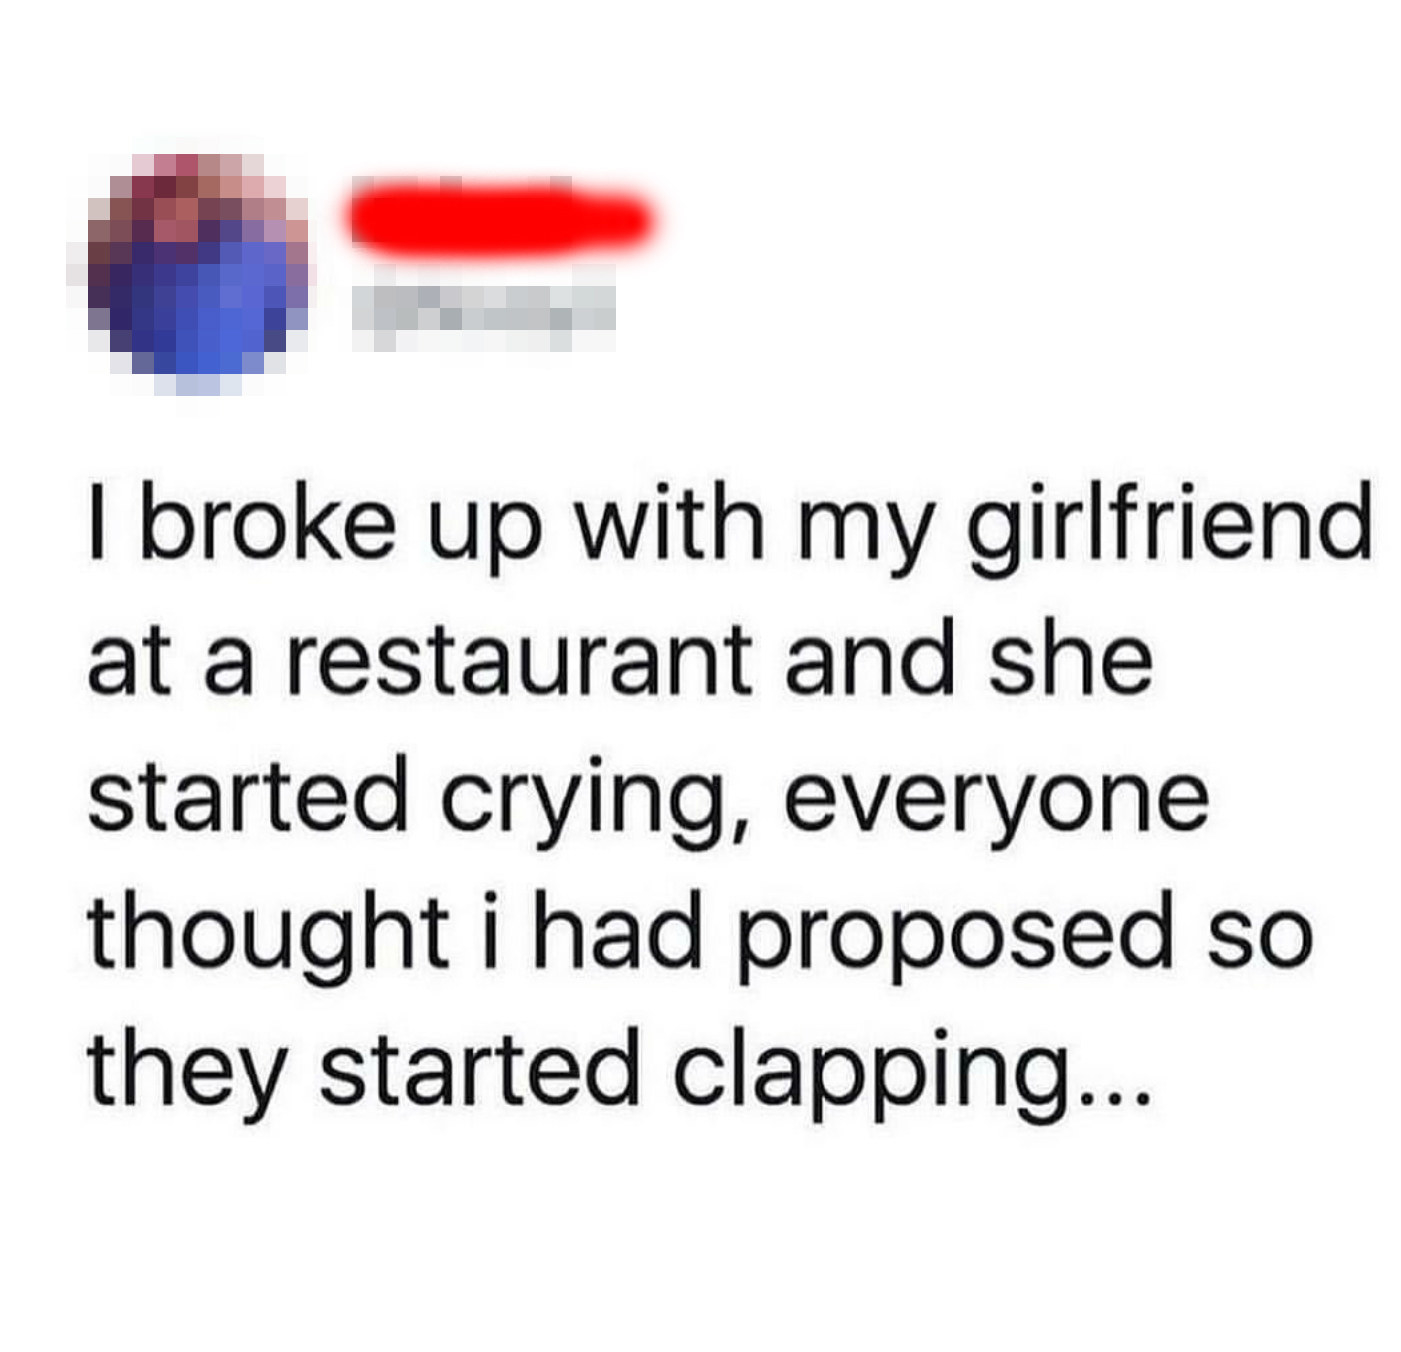 person who gets broken up with their girlfriend and the restaurant starts clappiing: